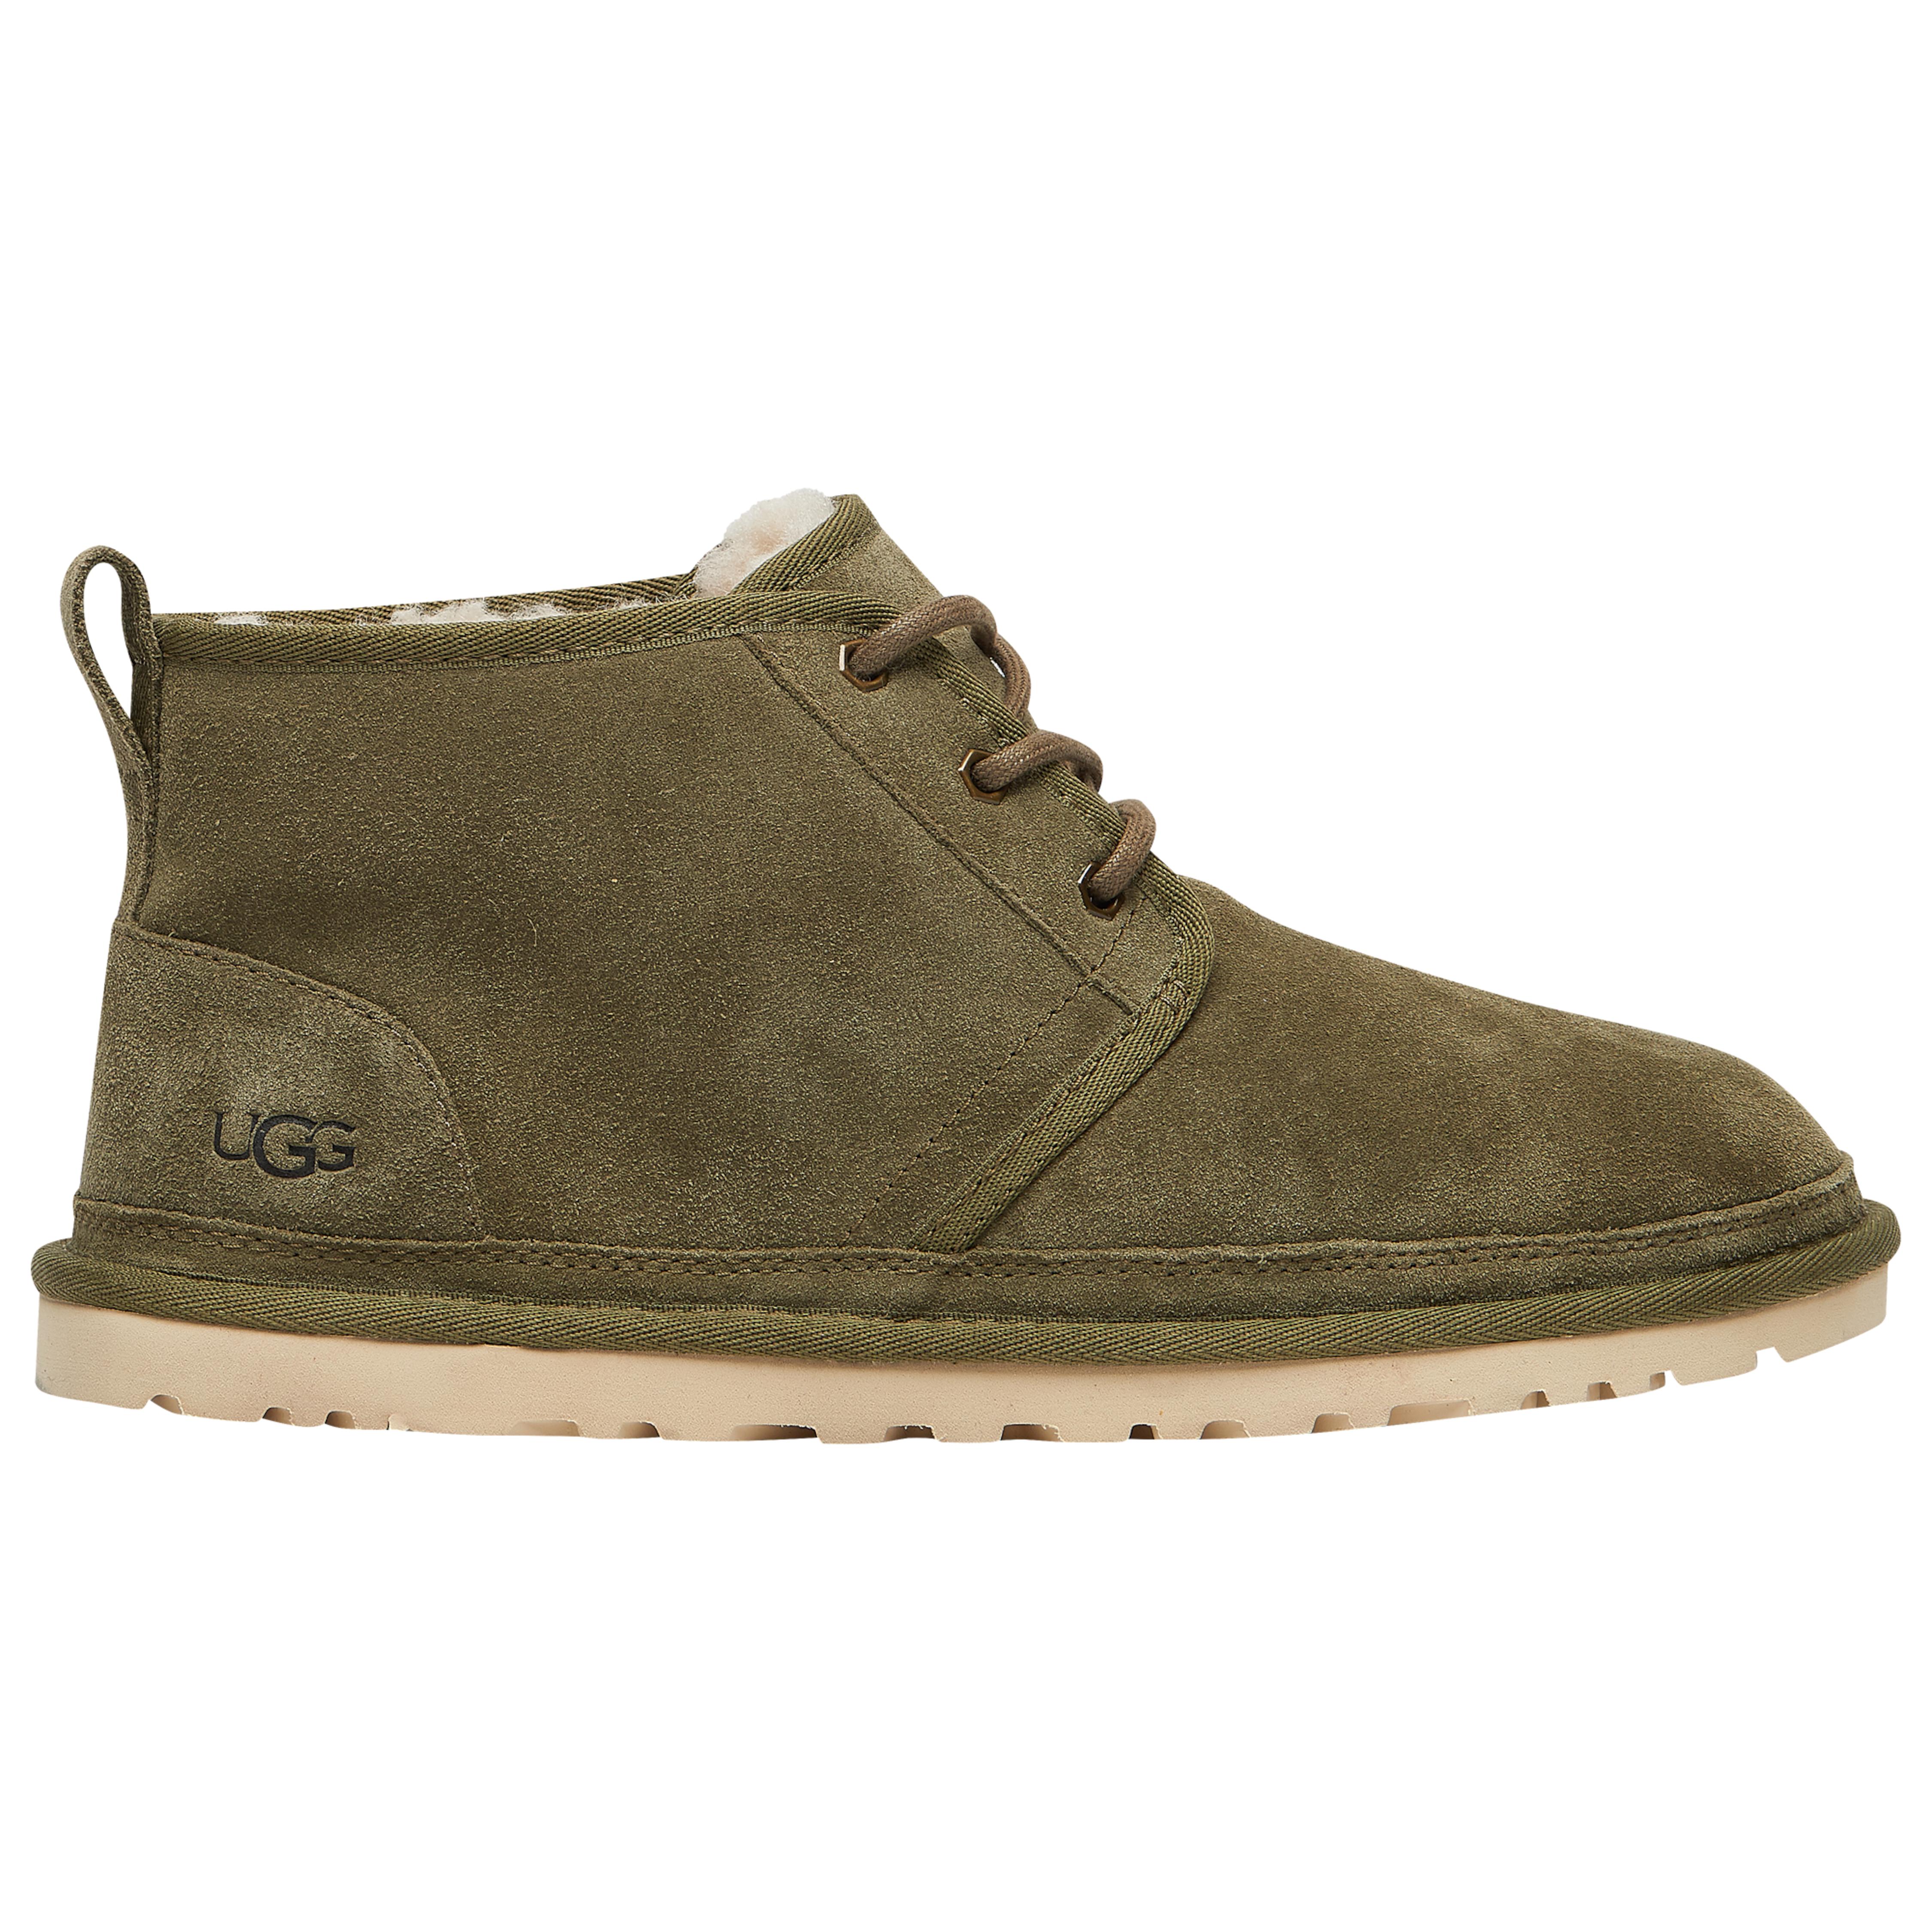 UGG Leather Neumel in Moss Green/Olive (Green) for Men - Lyst